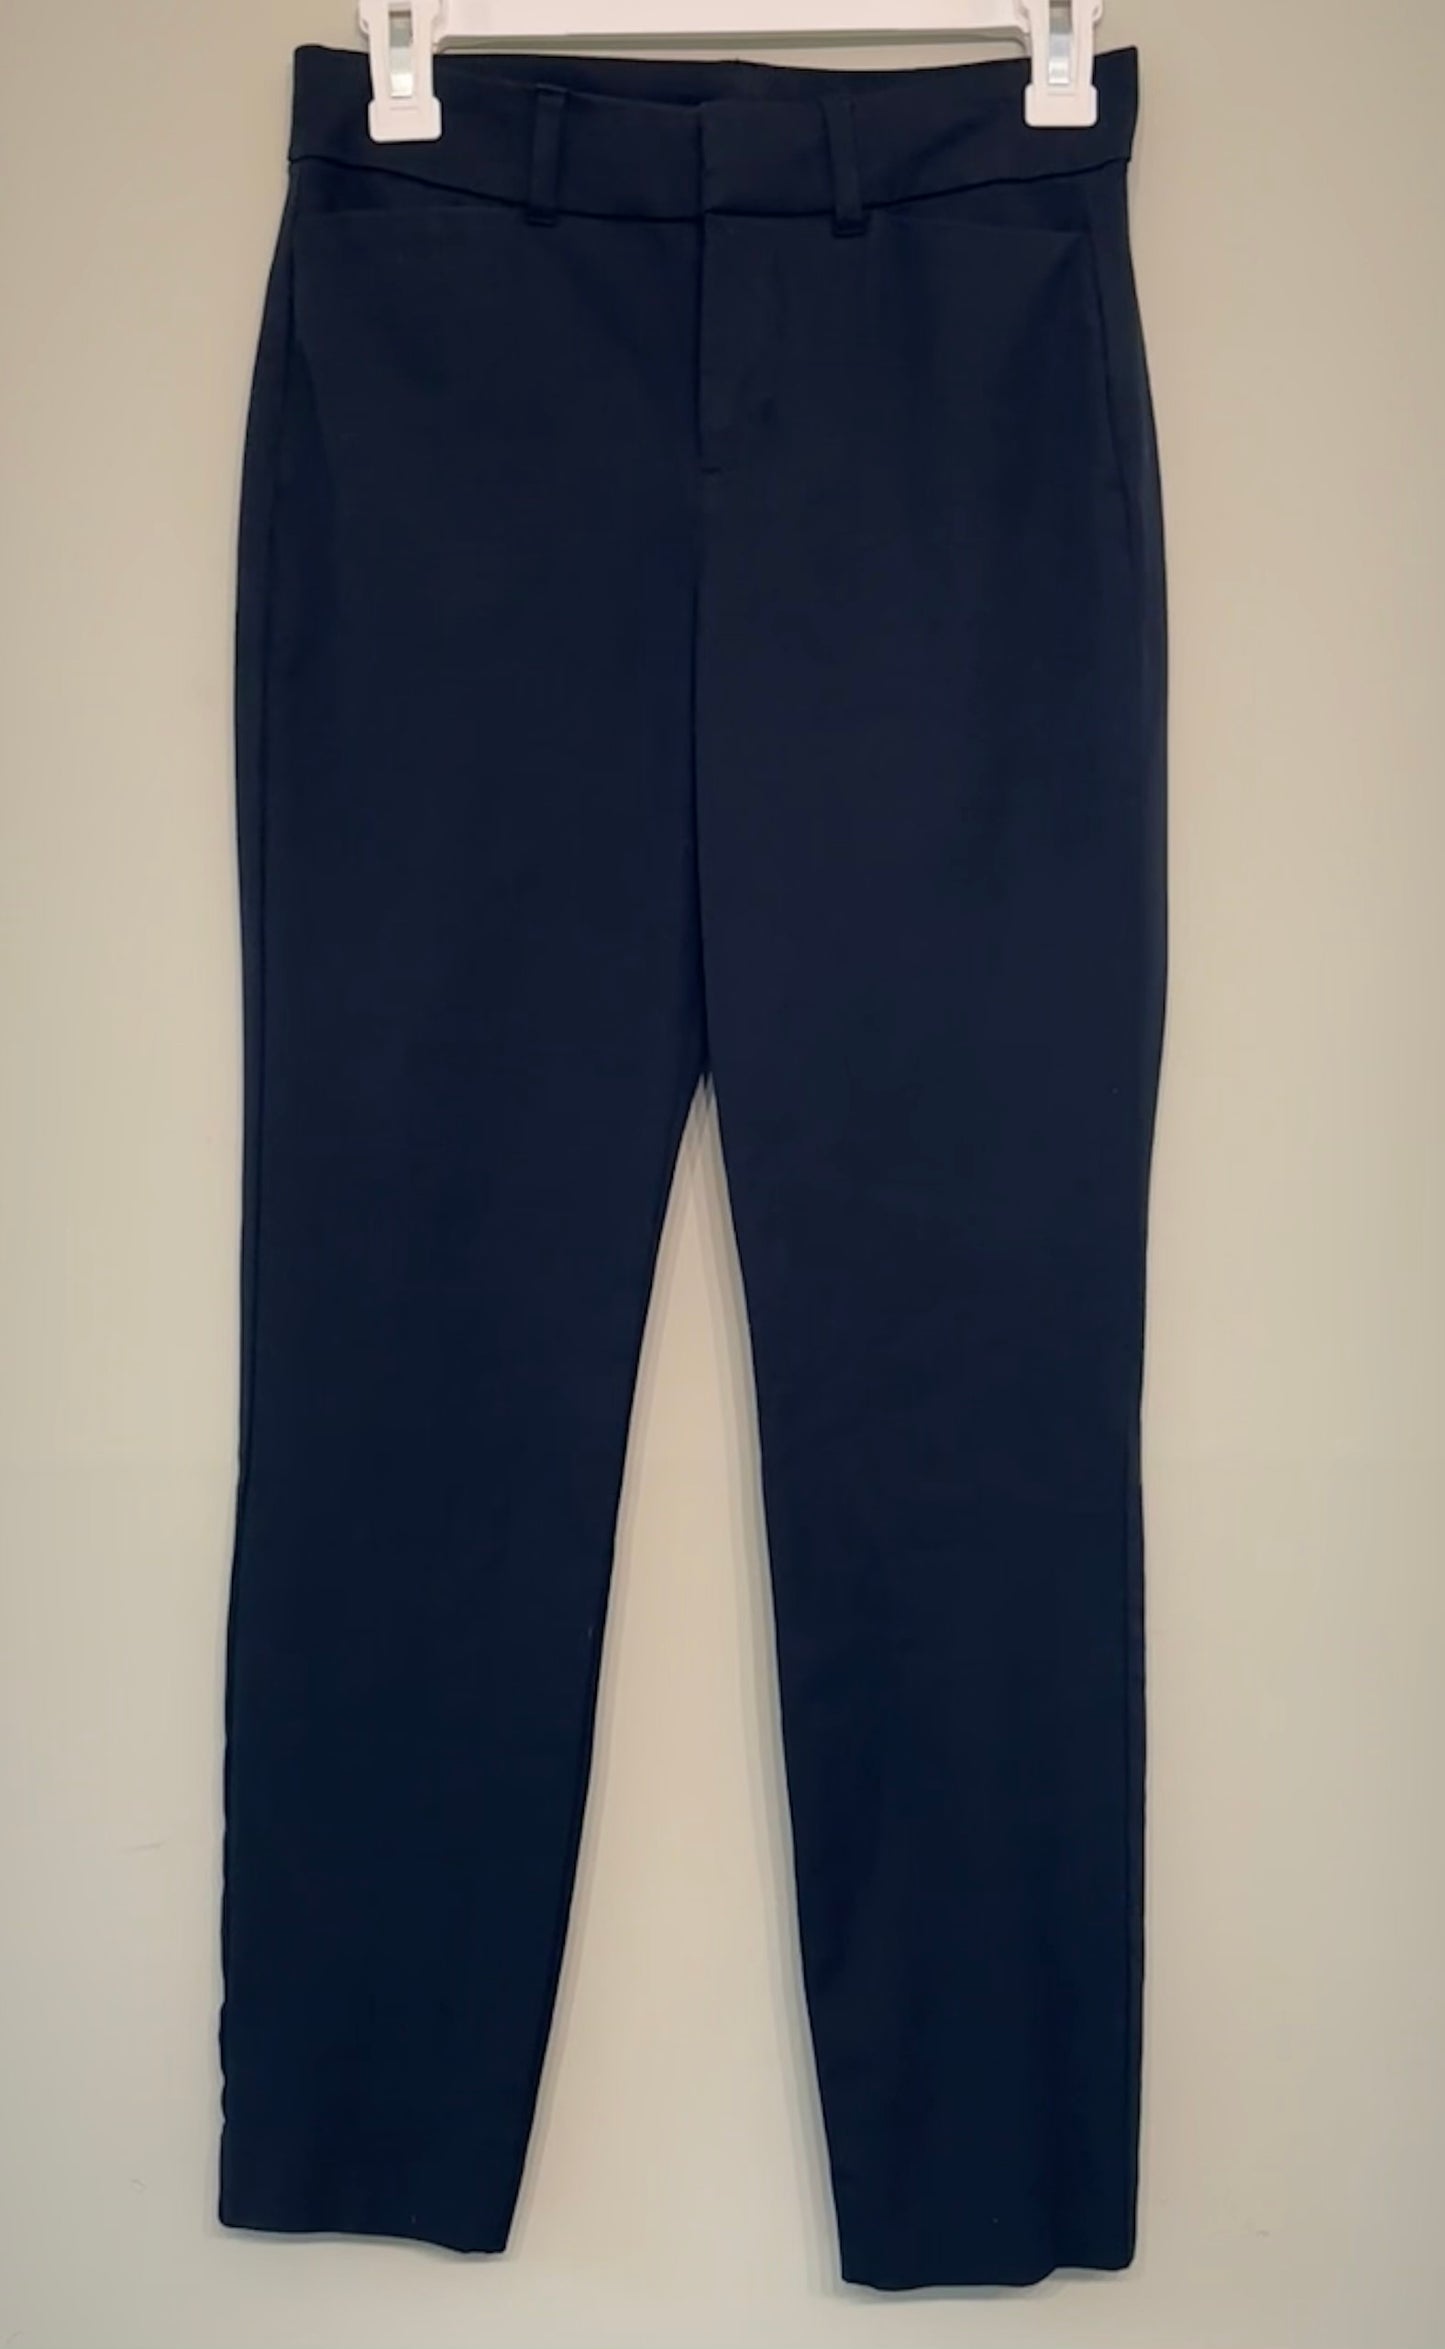 Old Navy Women’s 0 High Rise Pixie Pant Black